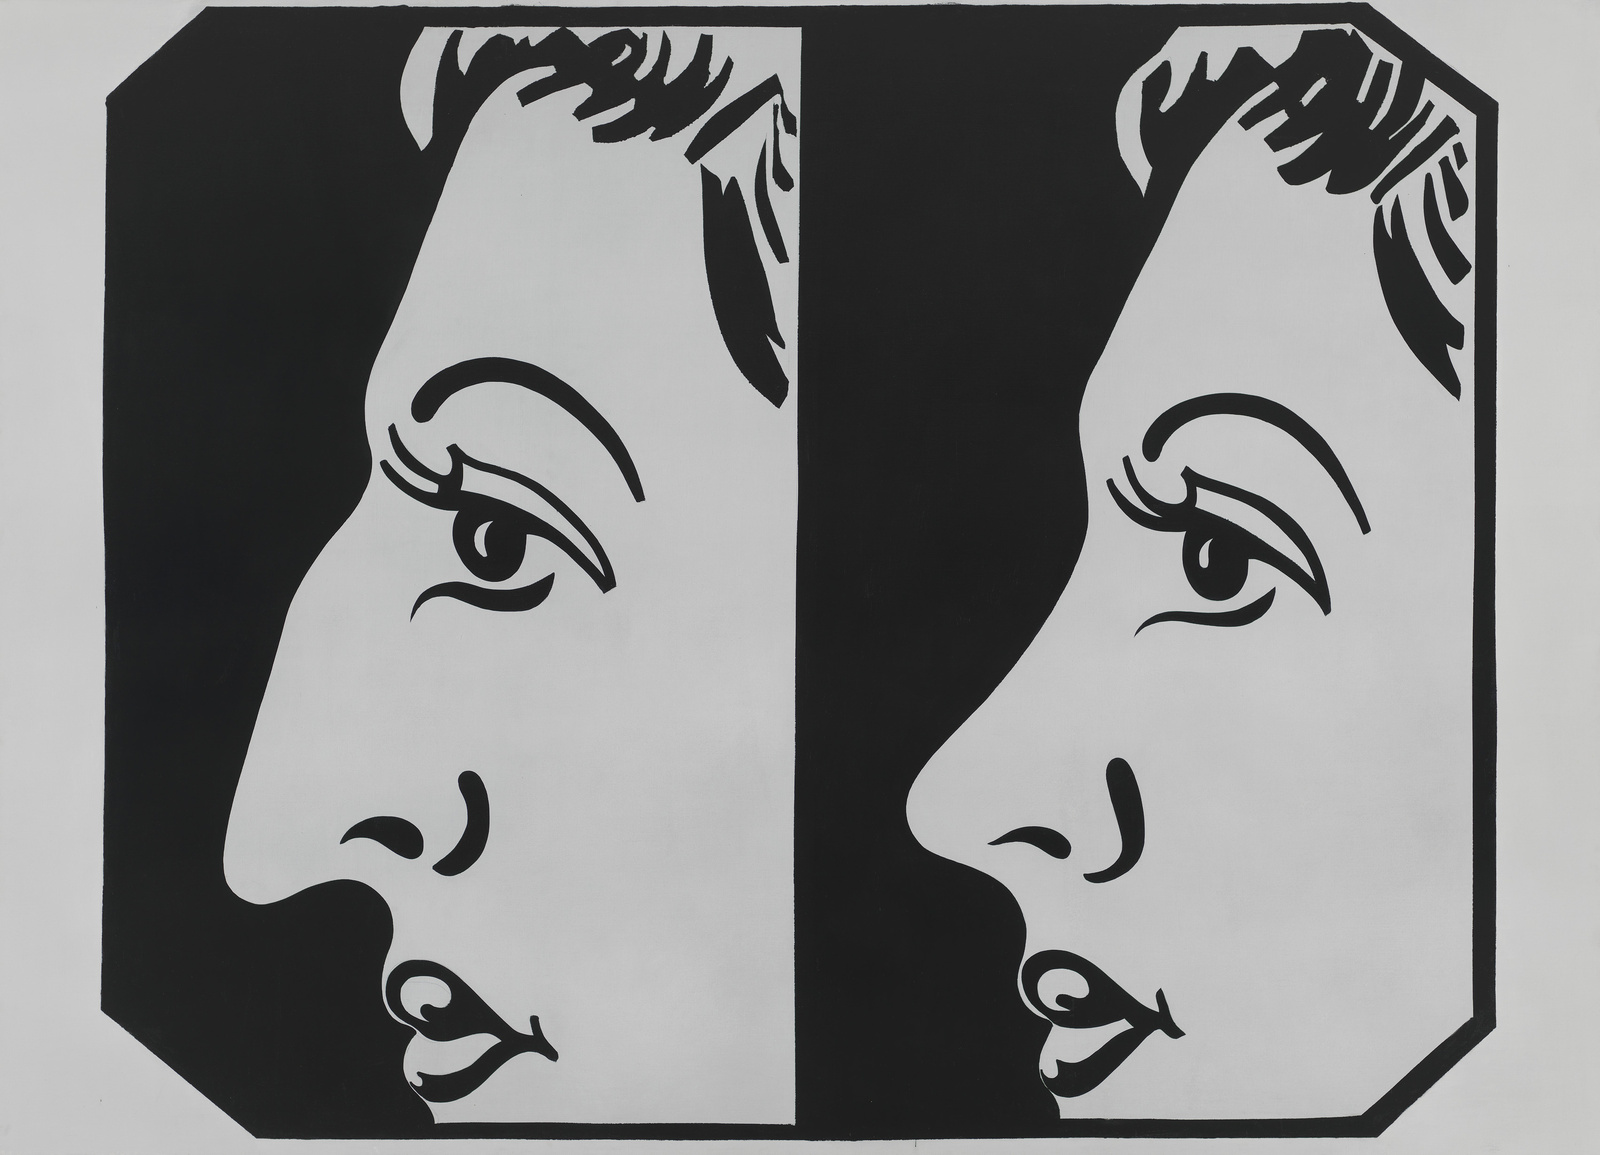 Two juxtaposed profile views of the same woman, one with a large nose and one with a small nose